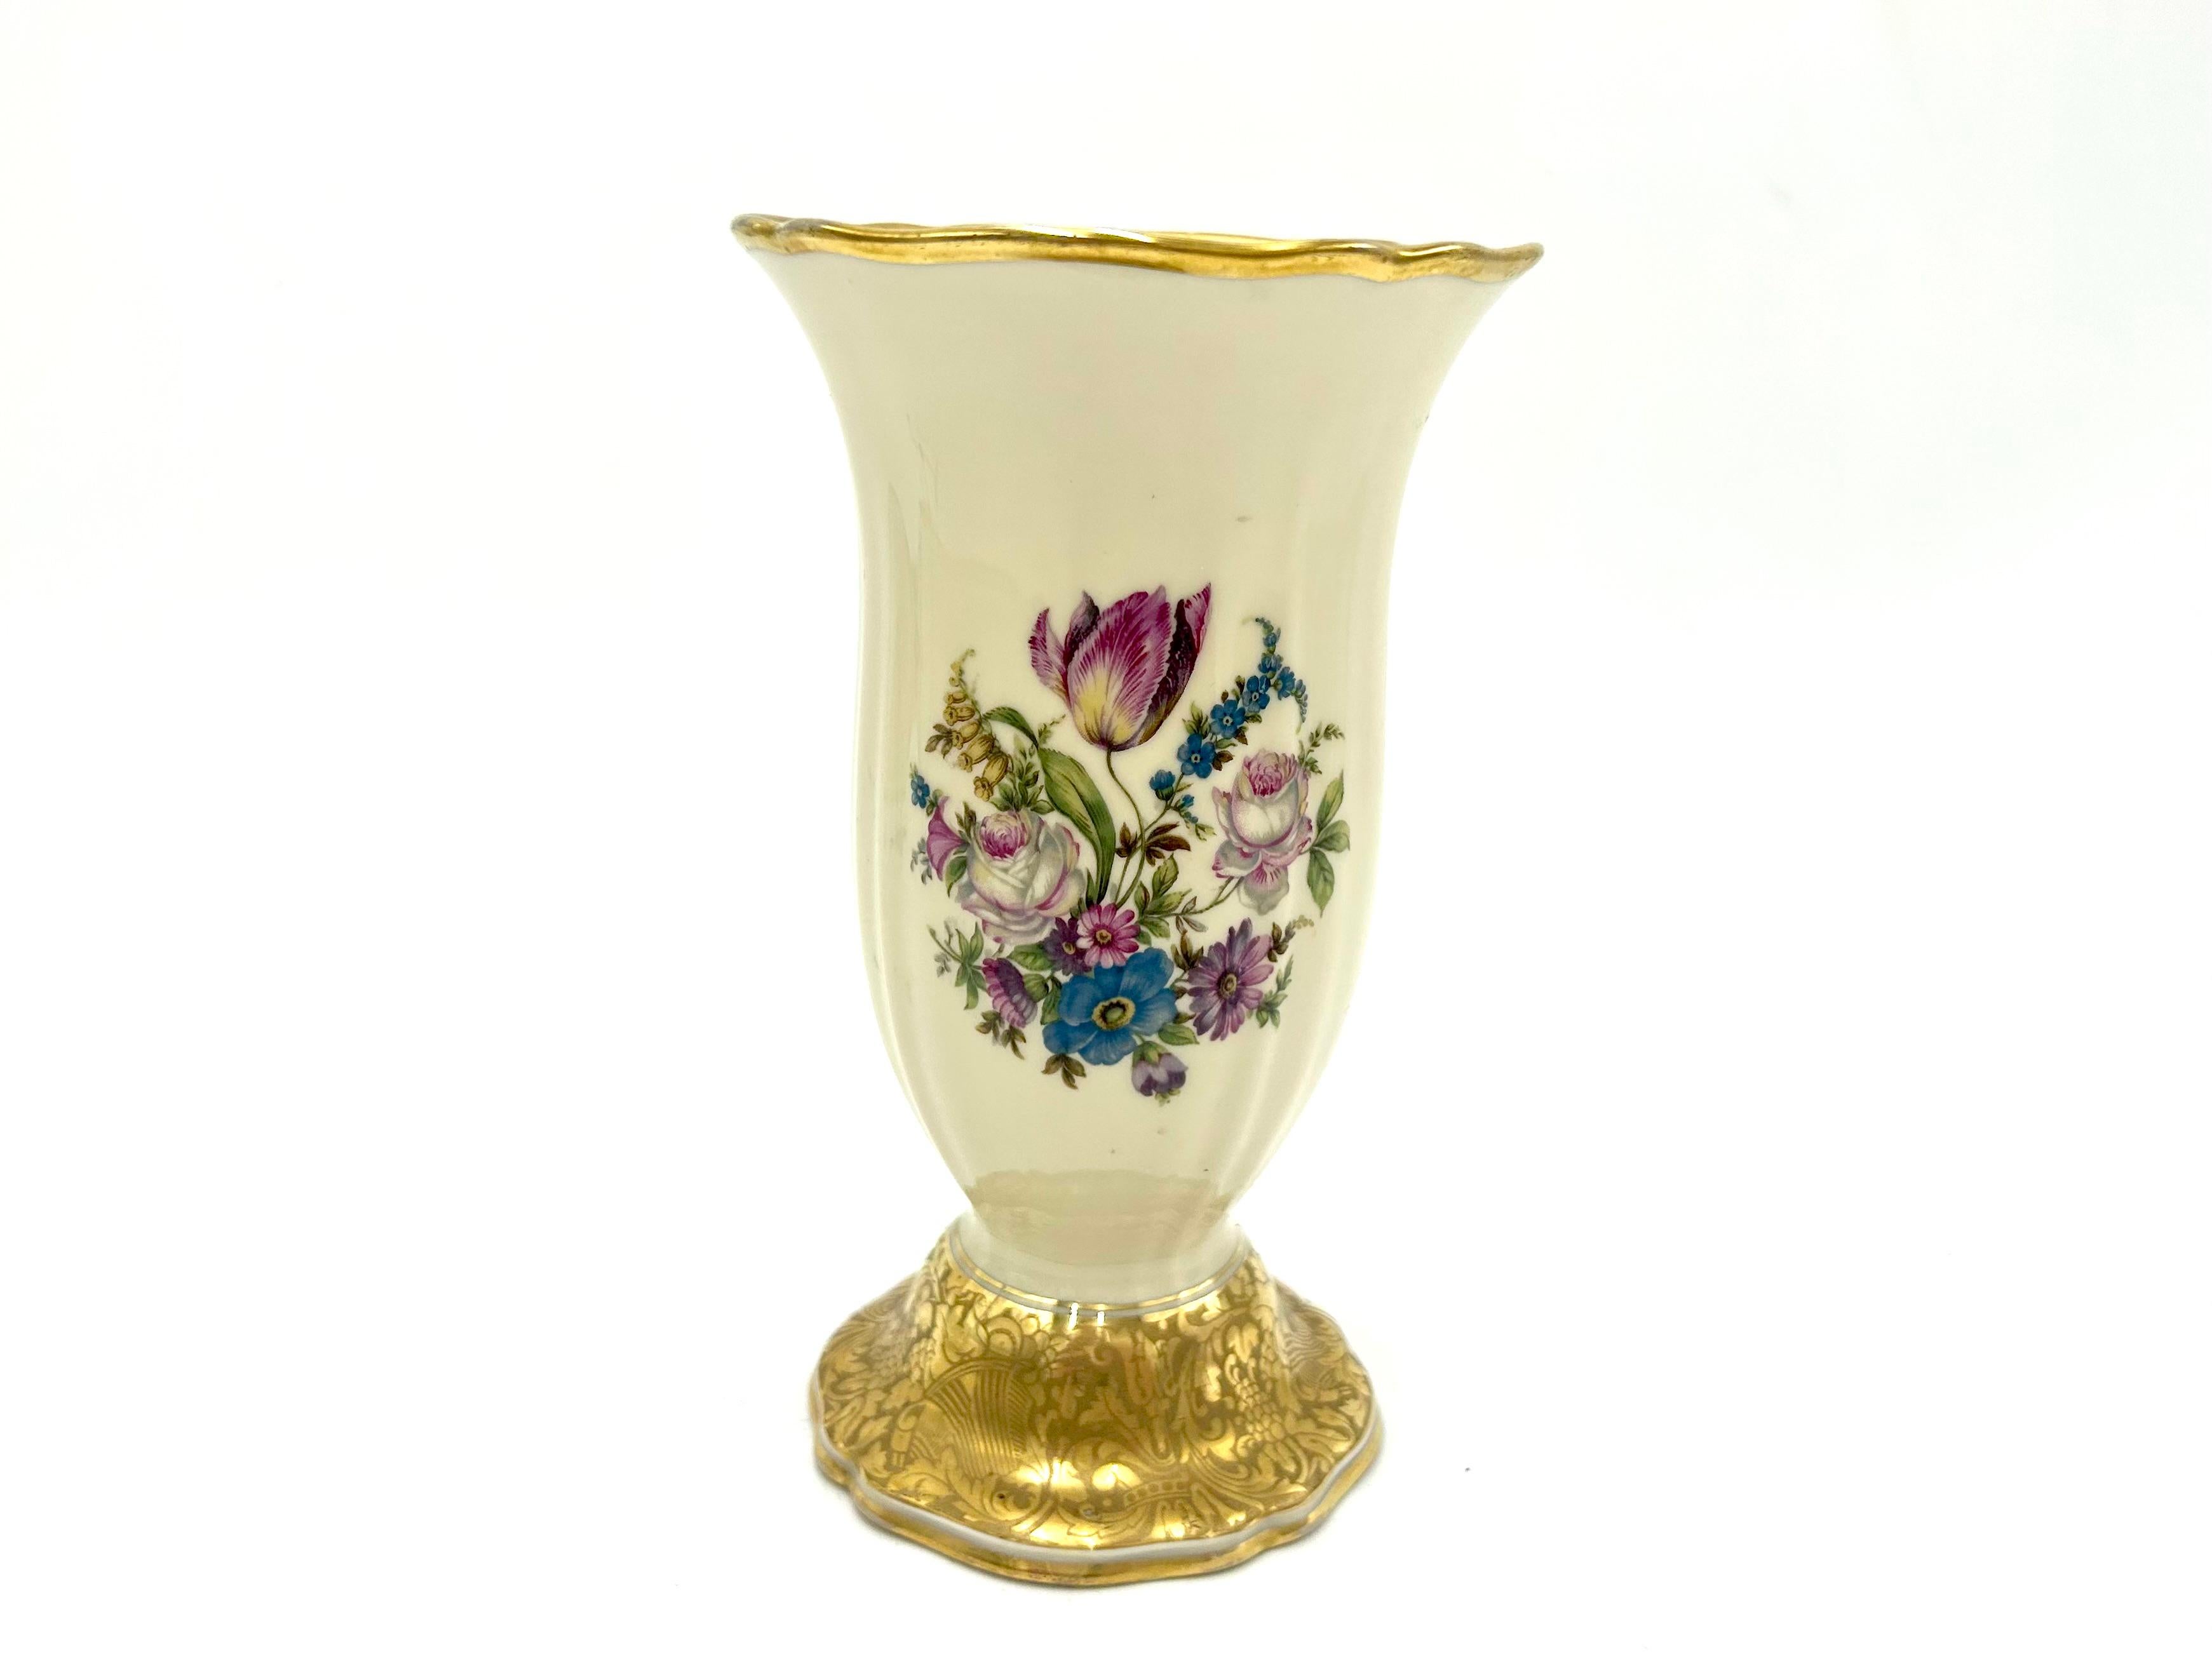 Porcelain vase made of ecru porcelain, decorated with gilding and a bouquet of flowers. Produced in Germany by the renowned Rosenthal label, Chippendale series. Marked with the mark used in 1942. Very good condition, no damage.
Height: